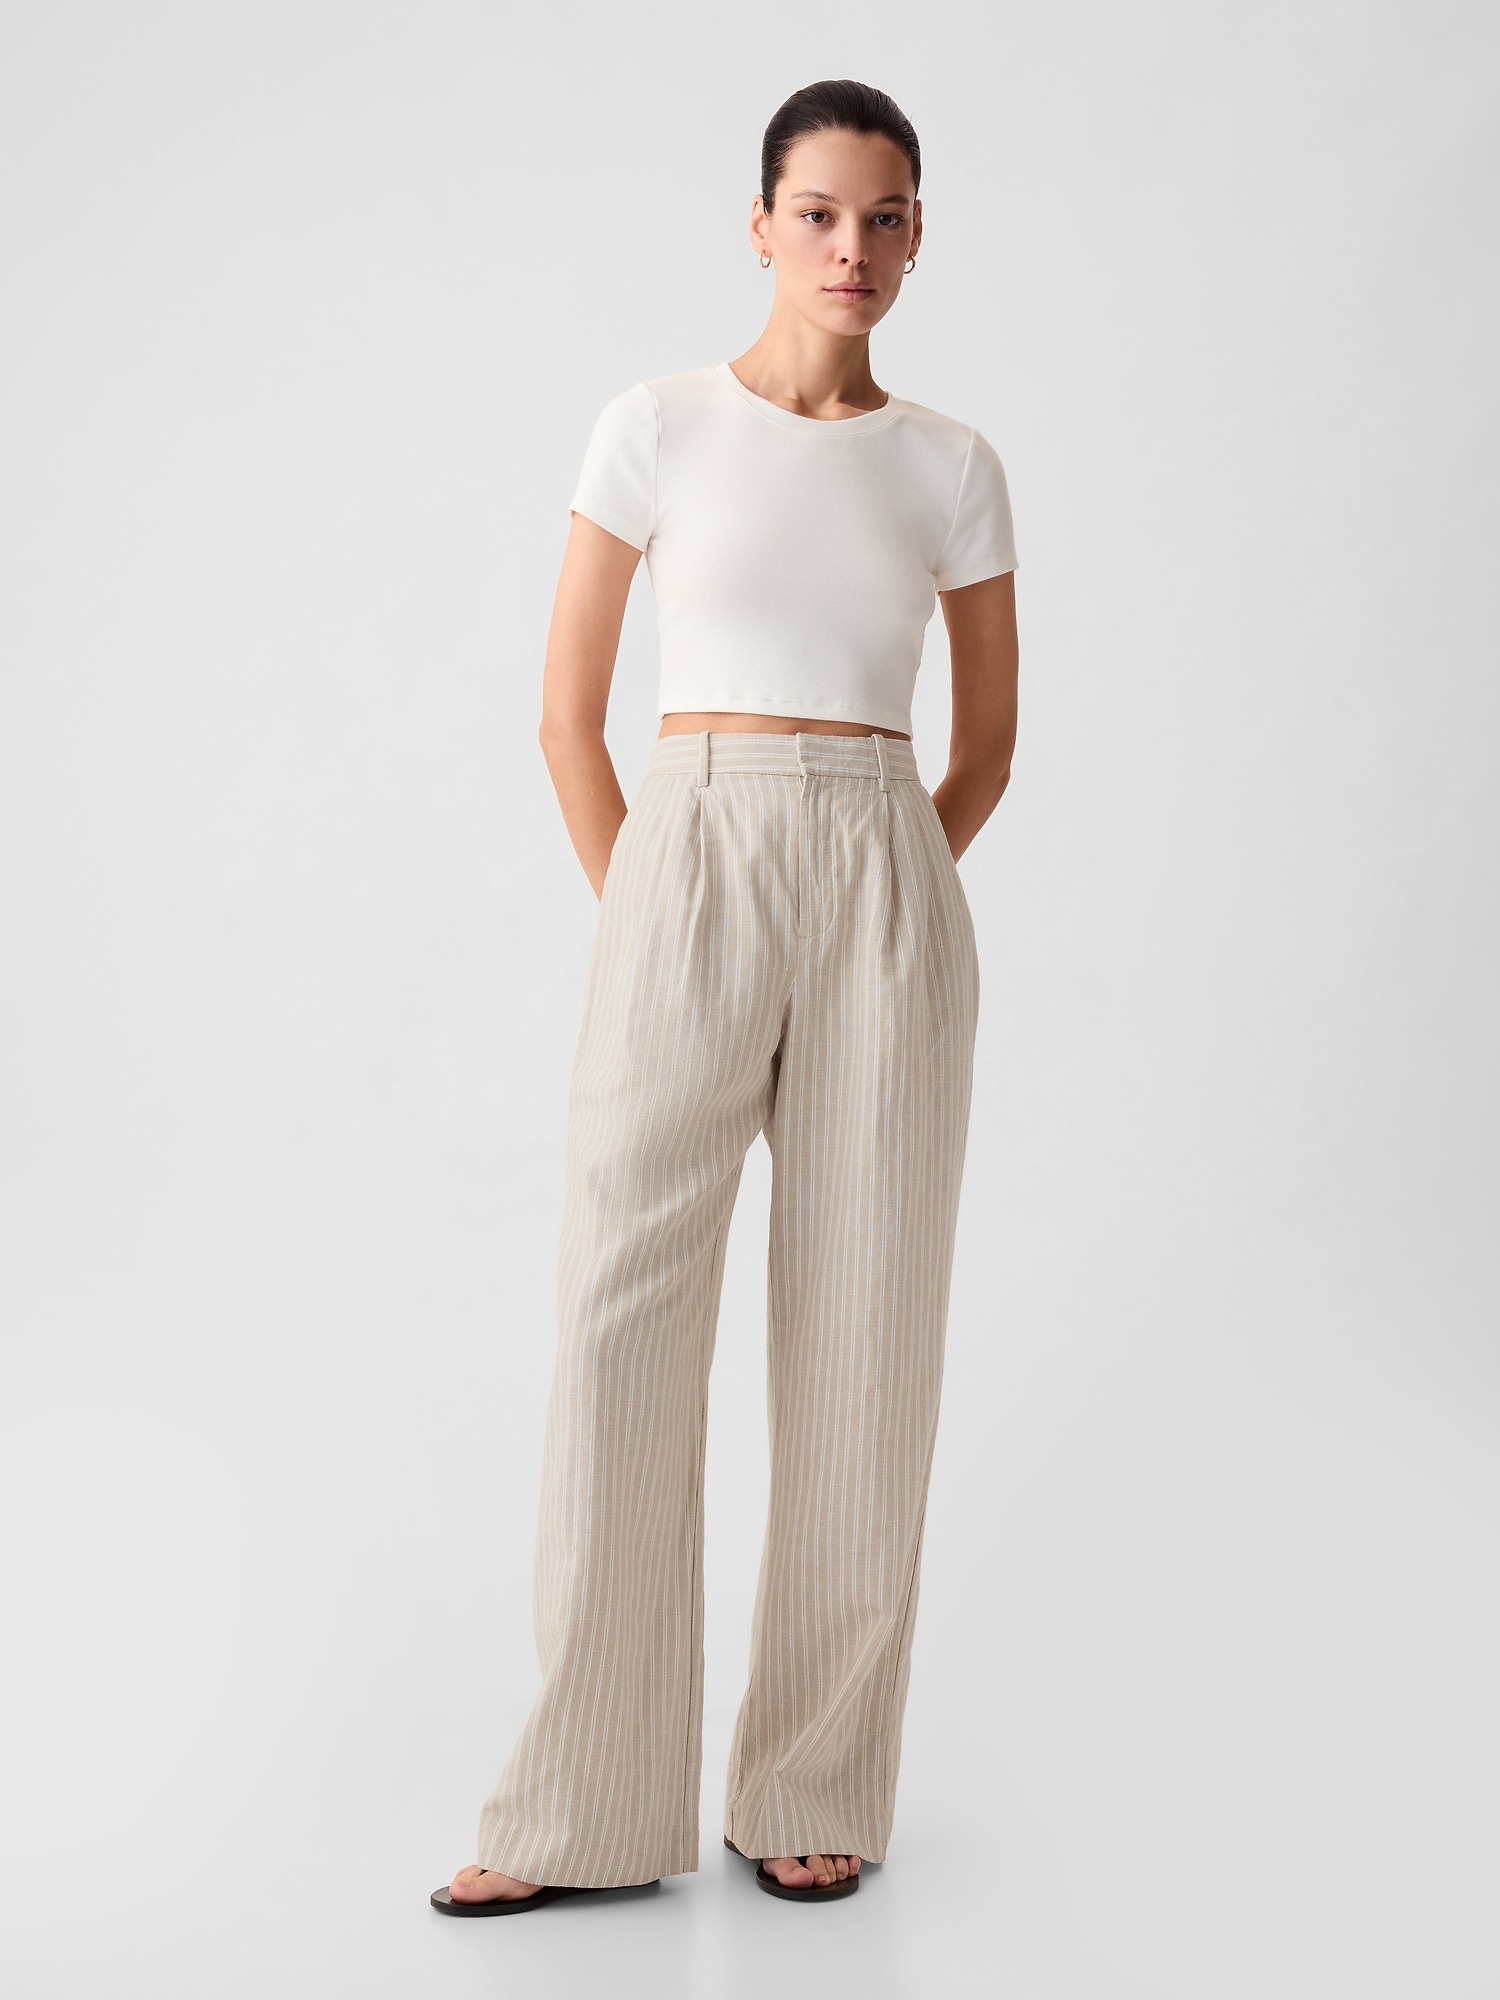 Buy Gap Loose Khaki Cargo Trousers from the Gap online shop